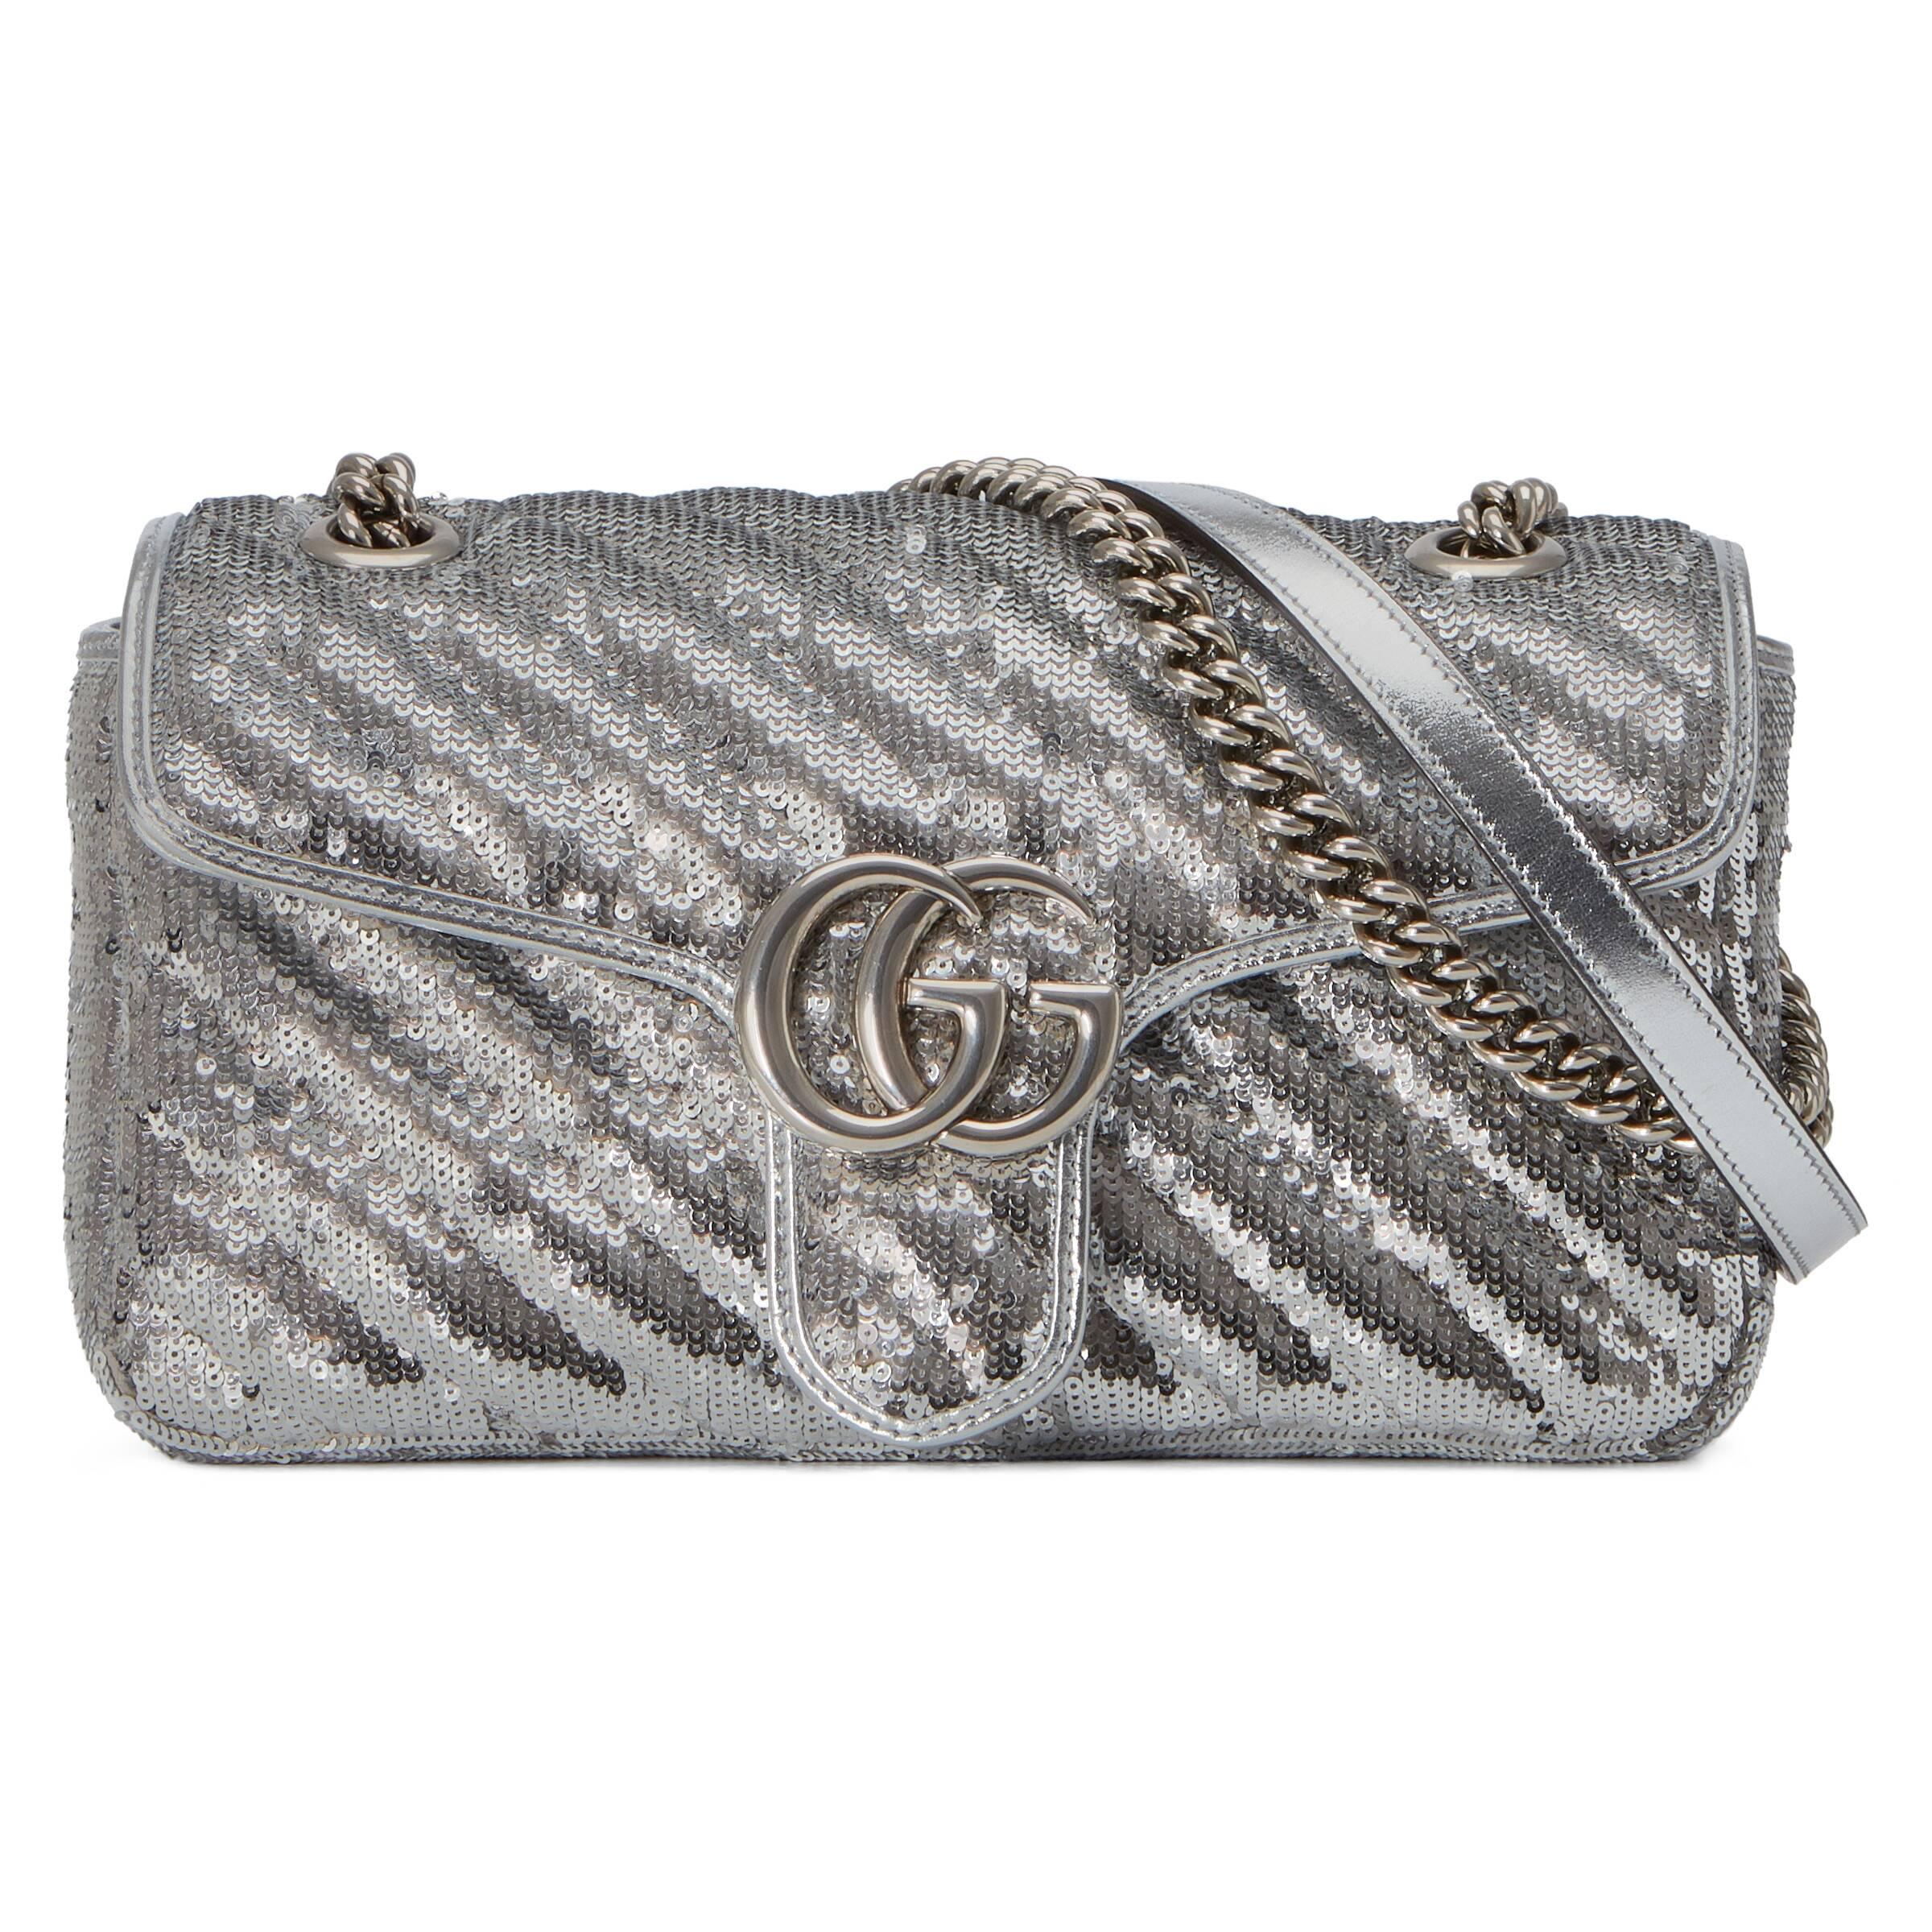 Gucci GG Marmont Small Sequin Shoulder Bag in Metallic | Lyst